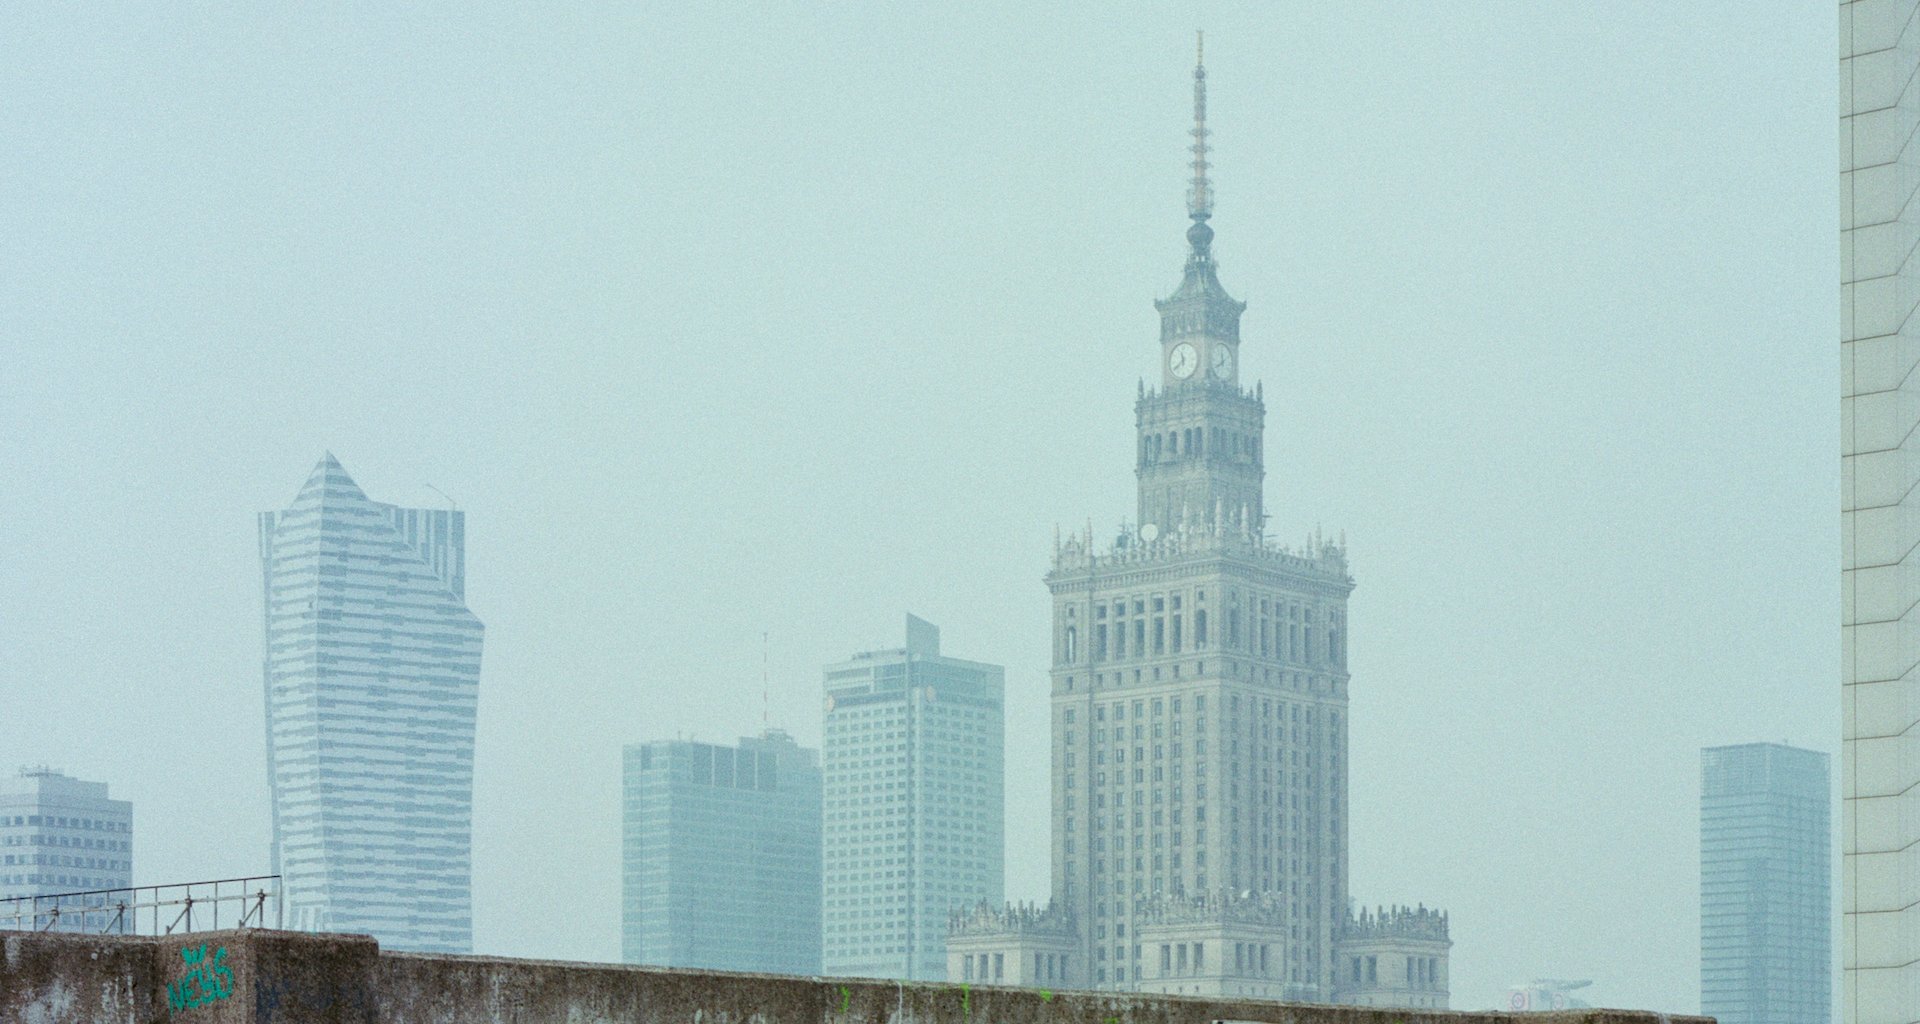 Inside Warsaw’s fixation on the Palace of Culture and Science, the socialist skyscraper in a capitalist city